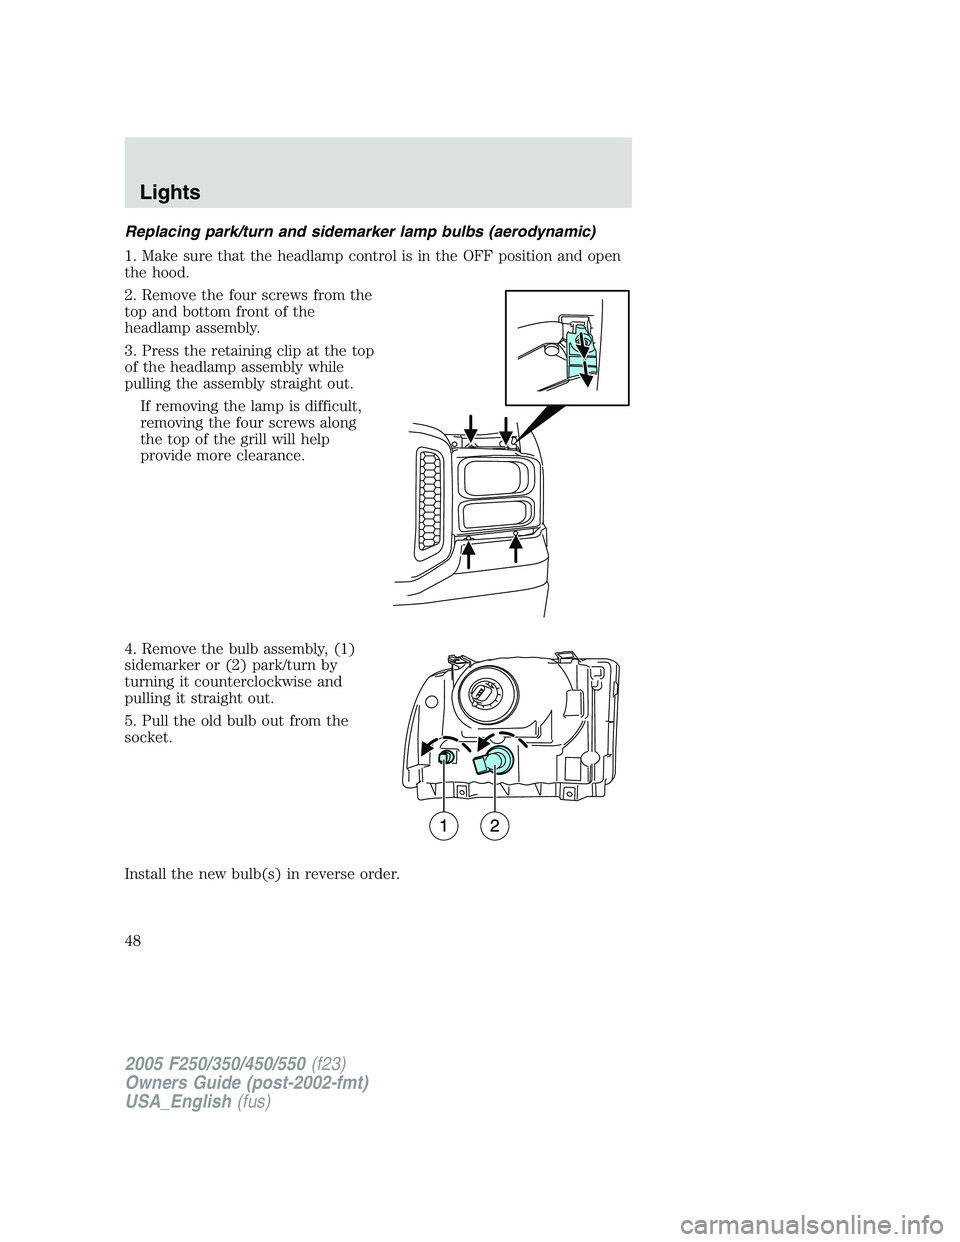 FORD F250 SUPER DUTY 2005  Owners Manual Replacing park/turn and sidemarker lamp bulbs (aerodynamic)
1. Make sure that the headlamp control is in the OFF position and open
the hood.
2. Remove the four screws from the
top and bottom front of 